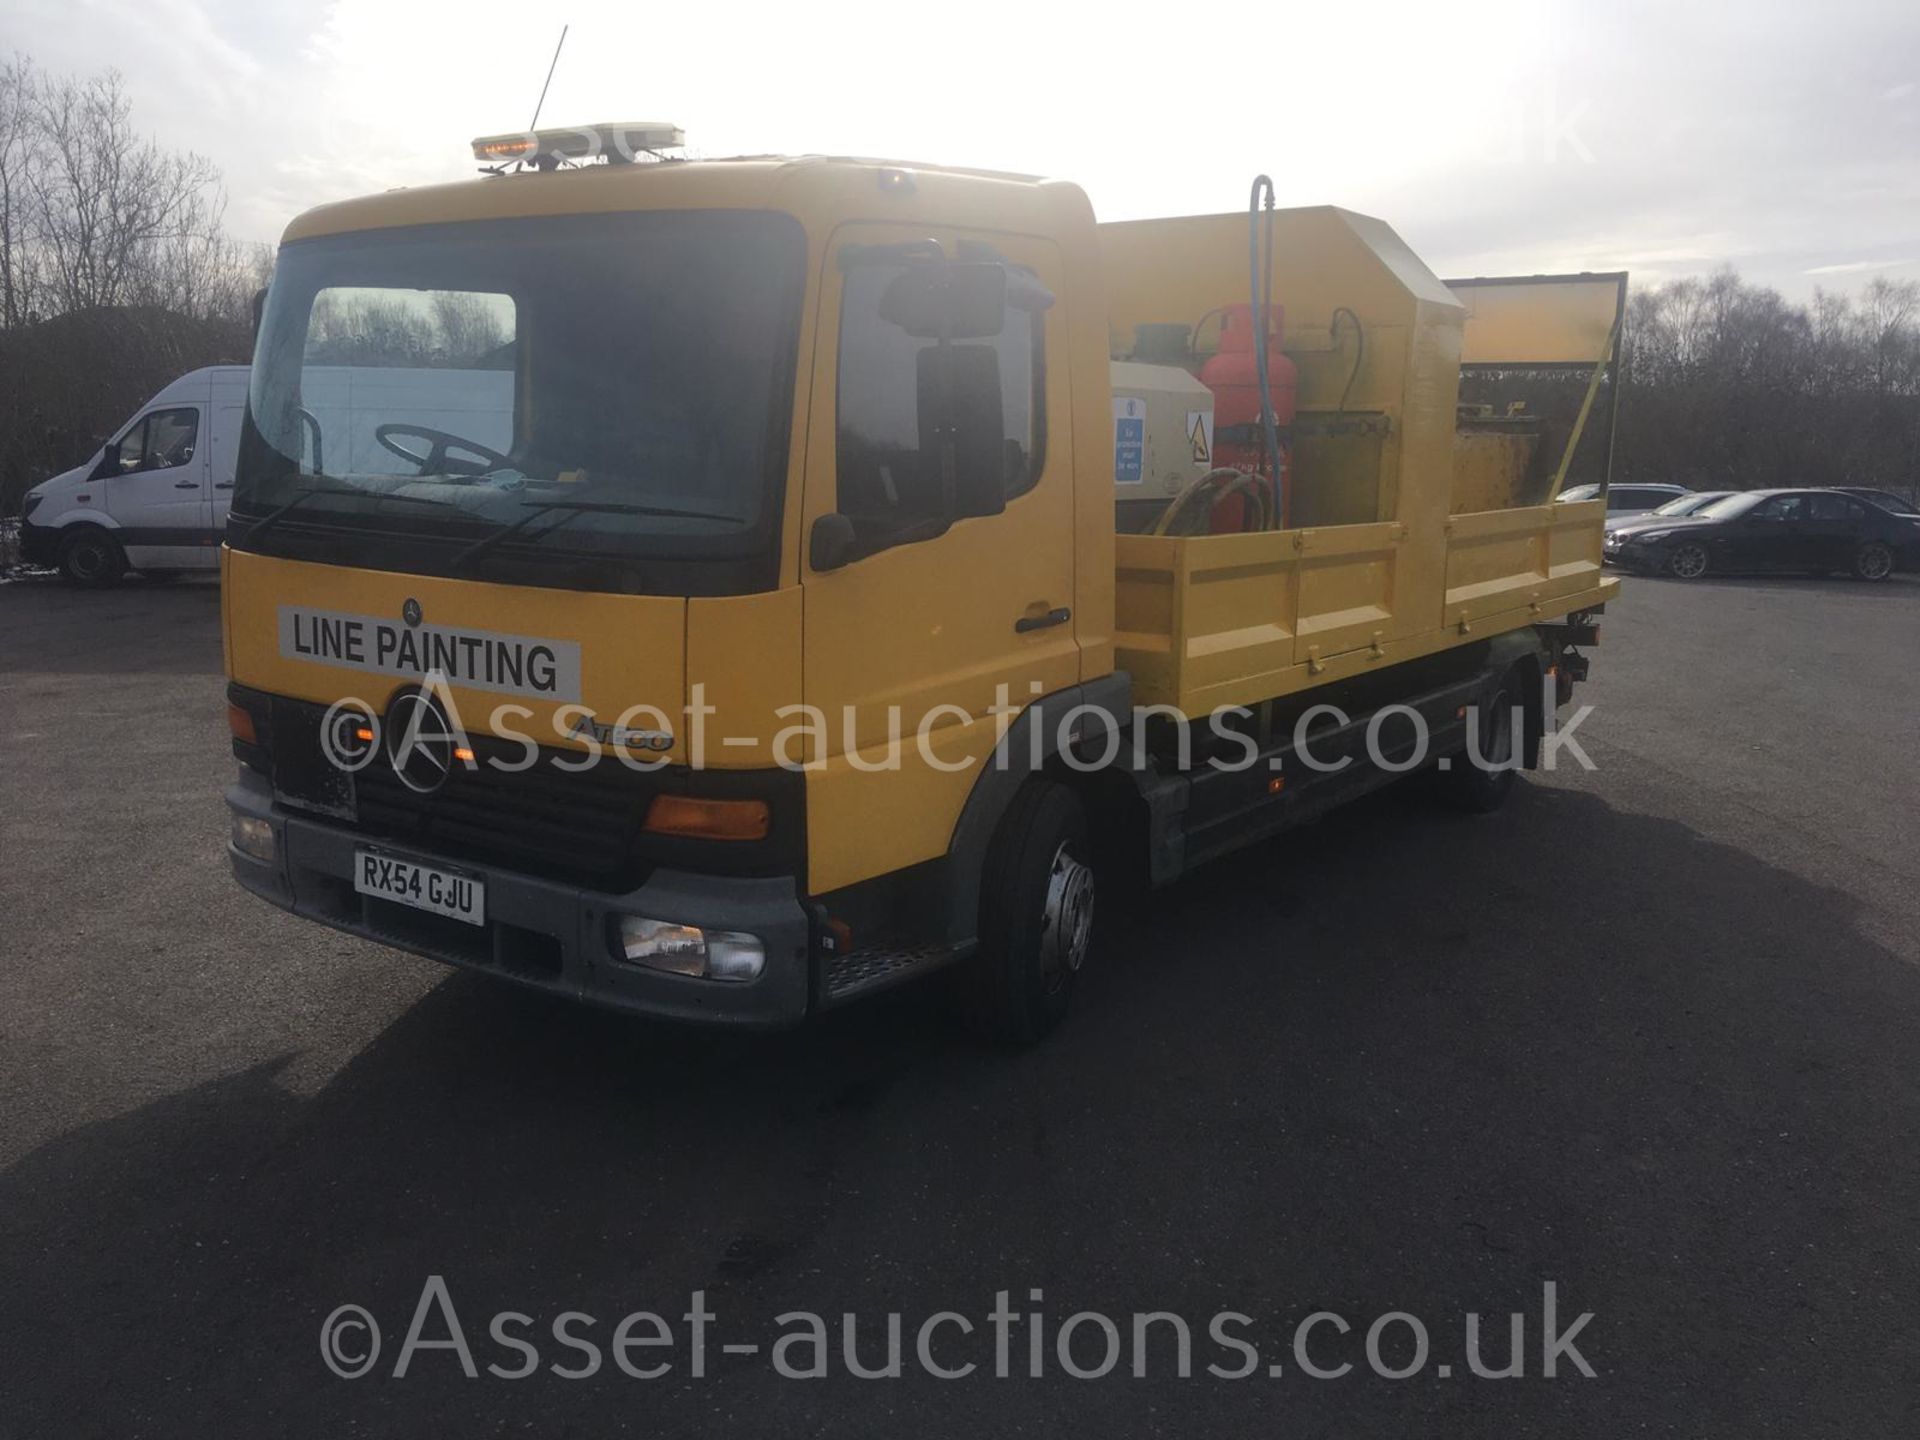 2004/54 REG MERCEDES ATEGO 1018 DAY YELLOW DROPSIDE LINE PAINTING LORRY 4.3L DIESEL ENGINE *NO VAT* - Image 3 of 128